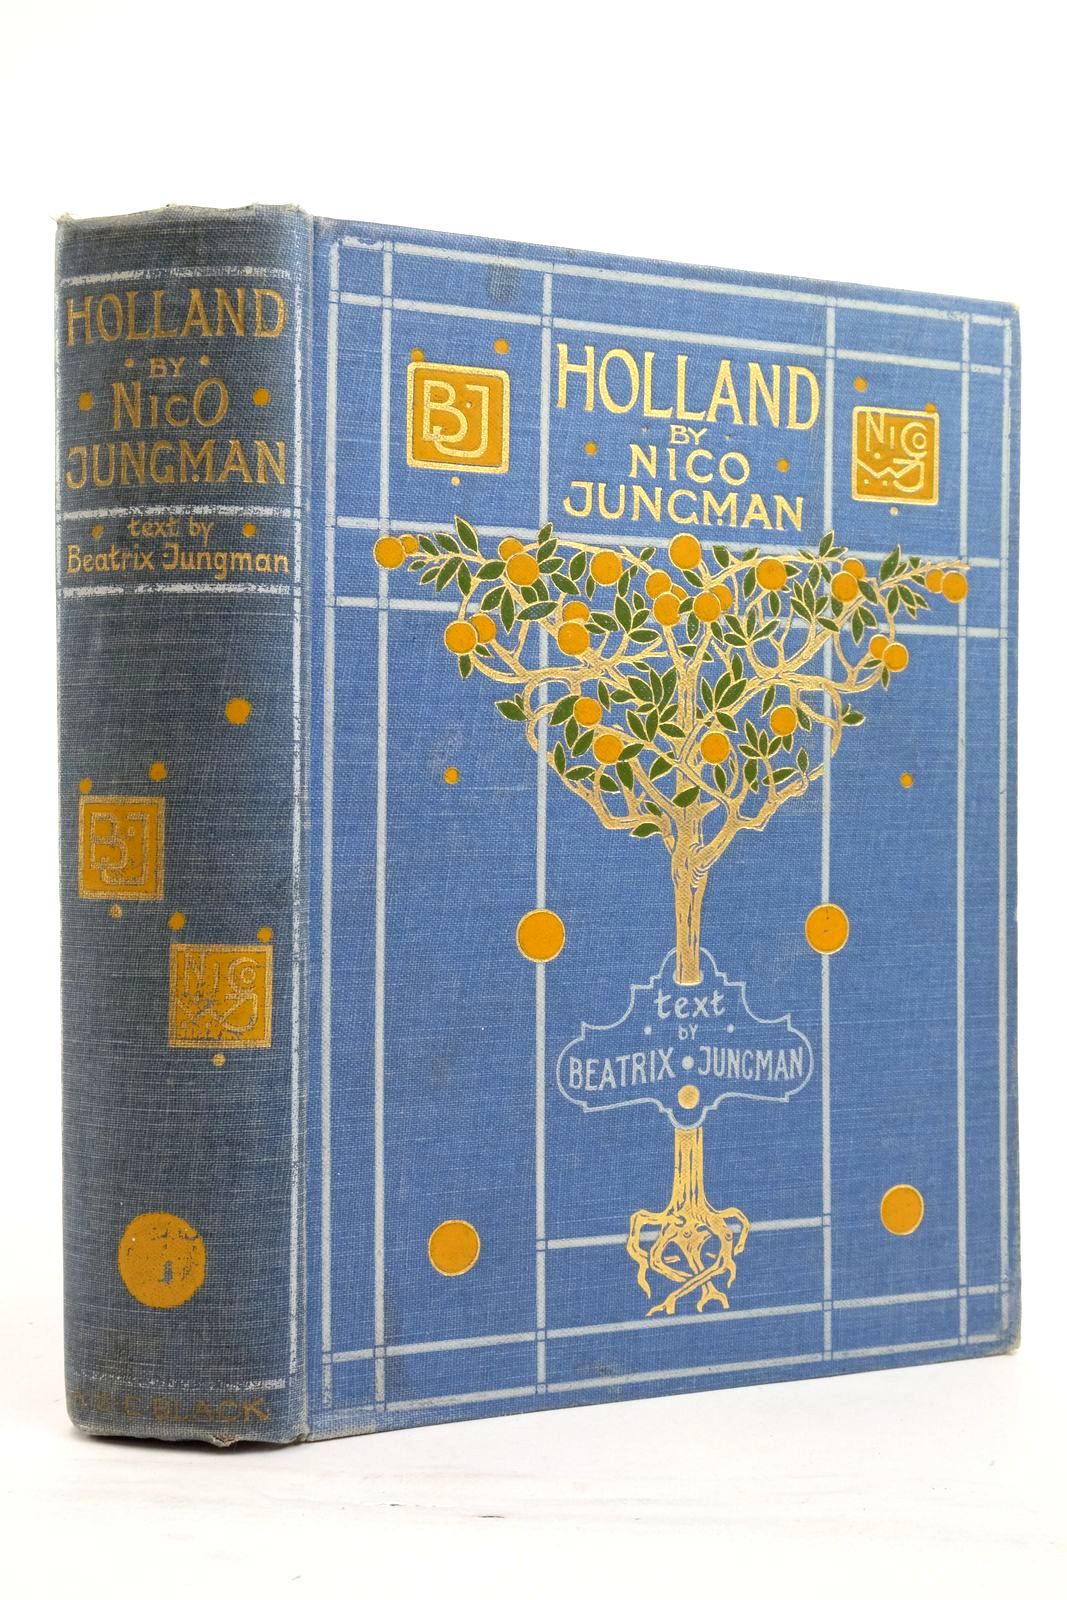 Photo of HOLLAND written by Jungman, Beatrix illustrated by Jungman, Nico published by Adam &amp; Charles Black (STOCK CODE: 2137219)  for sale by Stella & Rose's Books